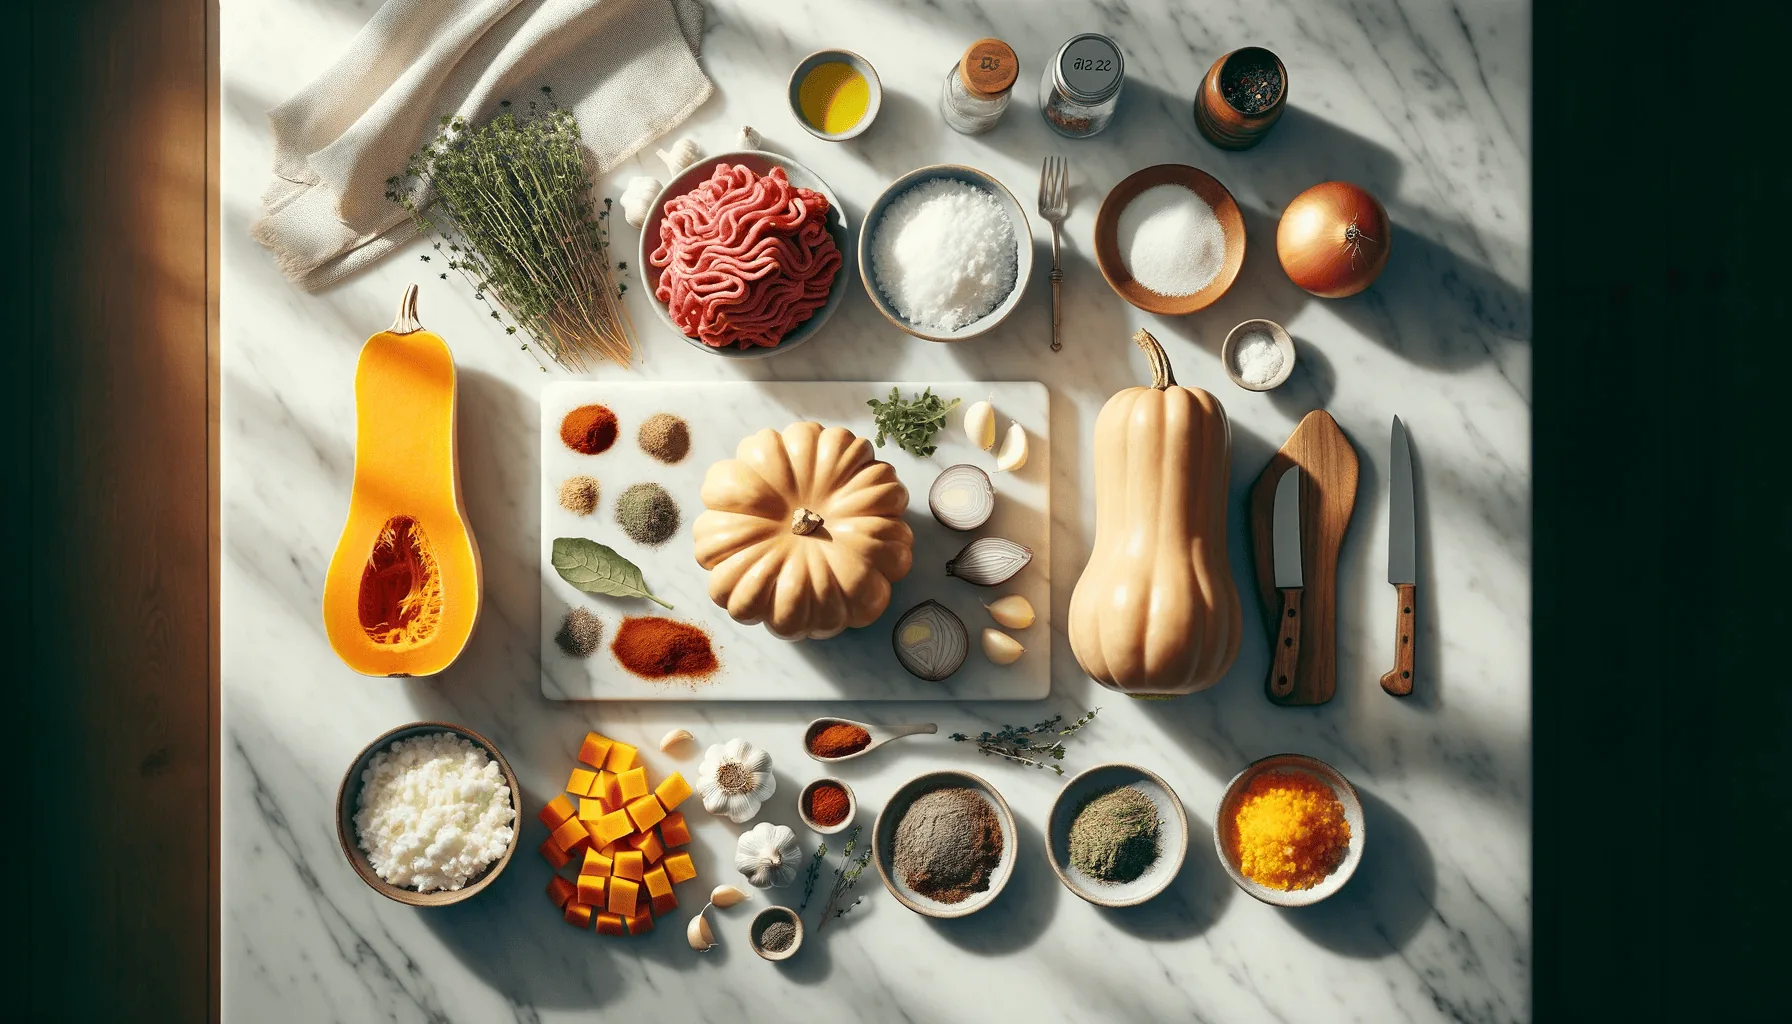 Ingredients laid out on a marble countertop